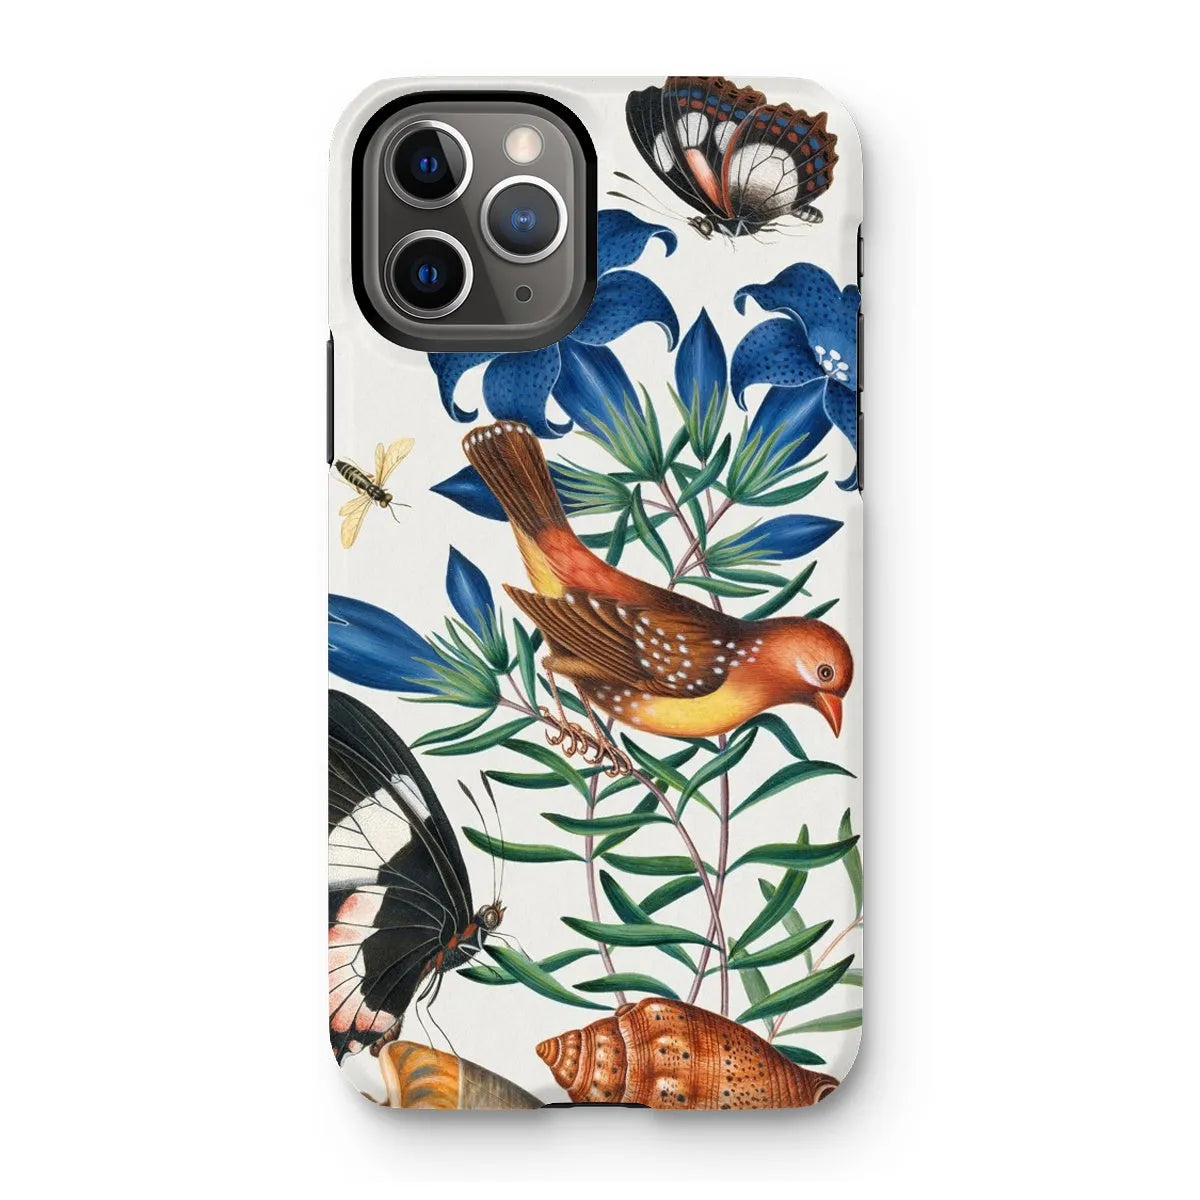 Avadavat Gentian Sawfly Swallowtail And Shells Phone Case - James Bolton - Iphone 11 Pro / Matte - Mobile Phone Cases